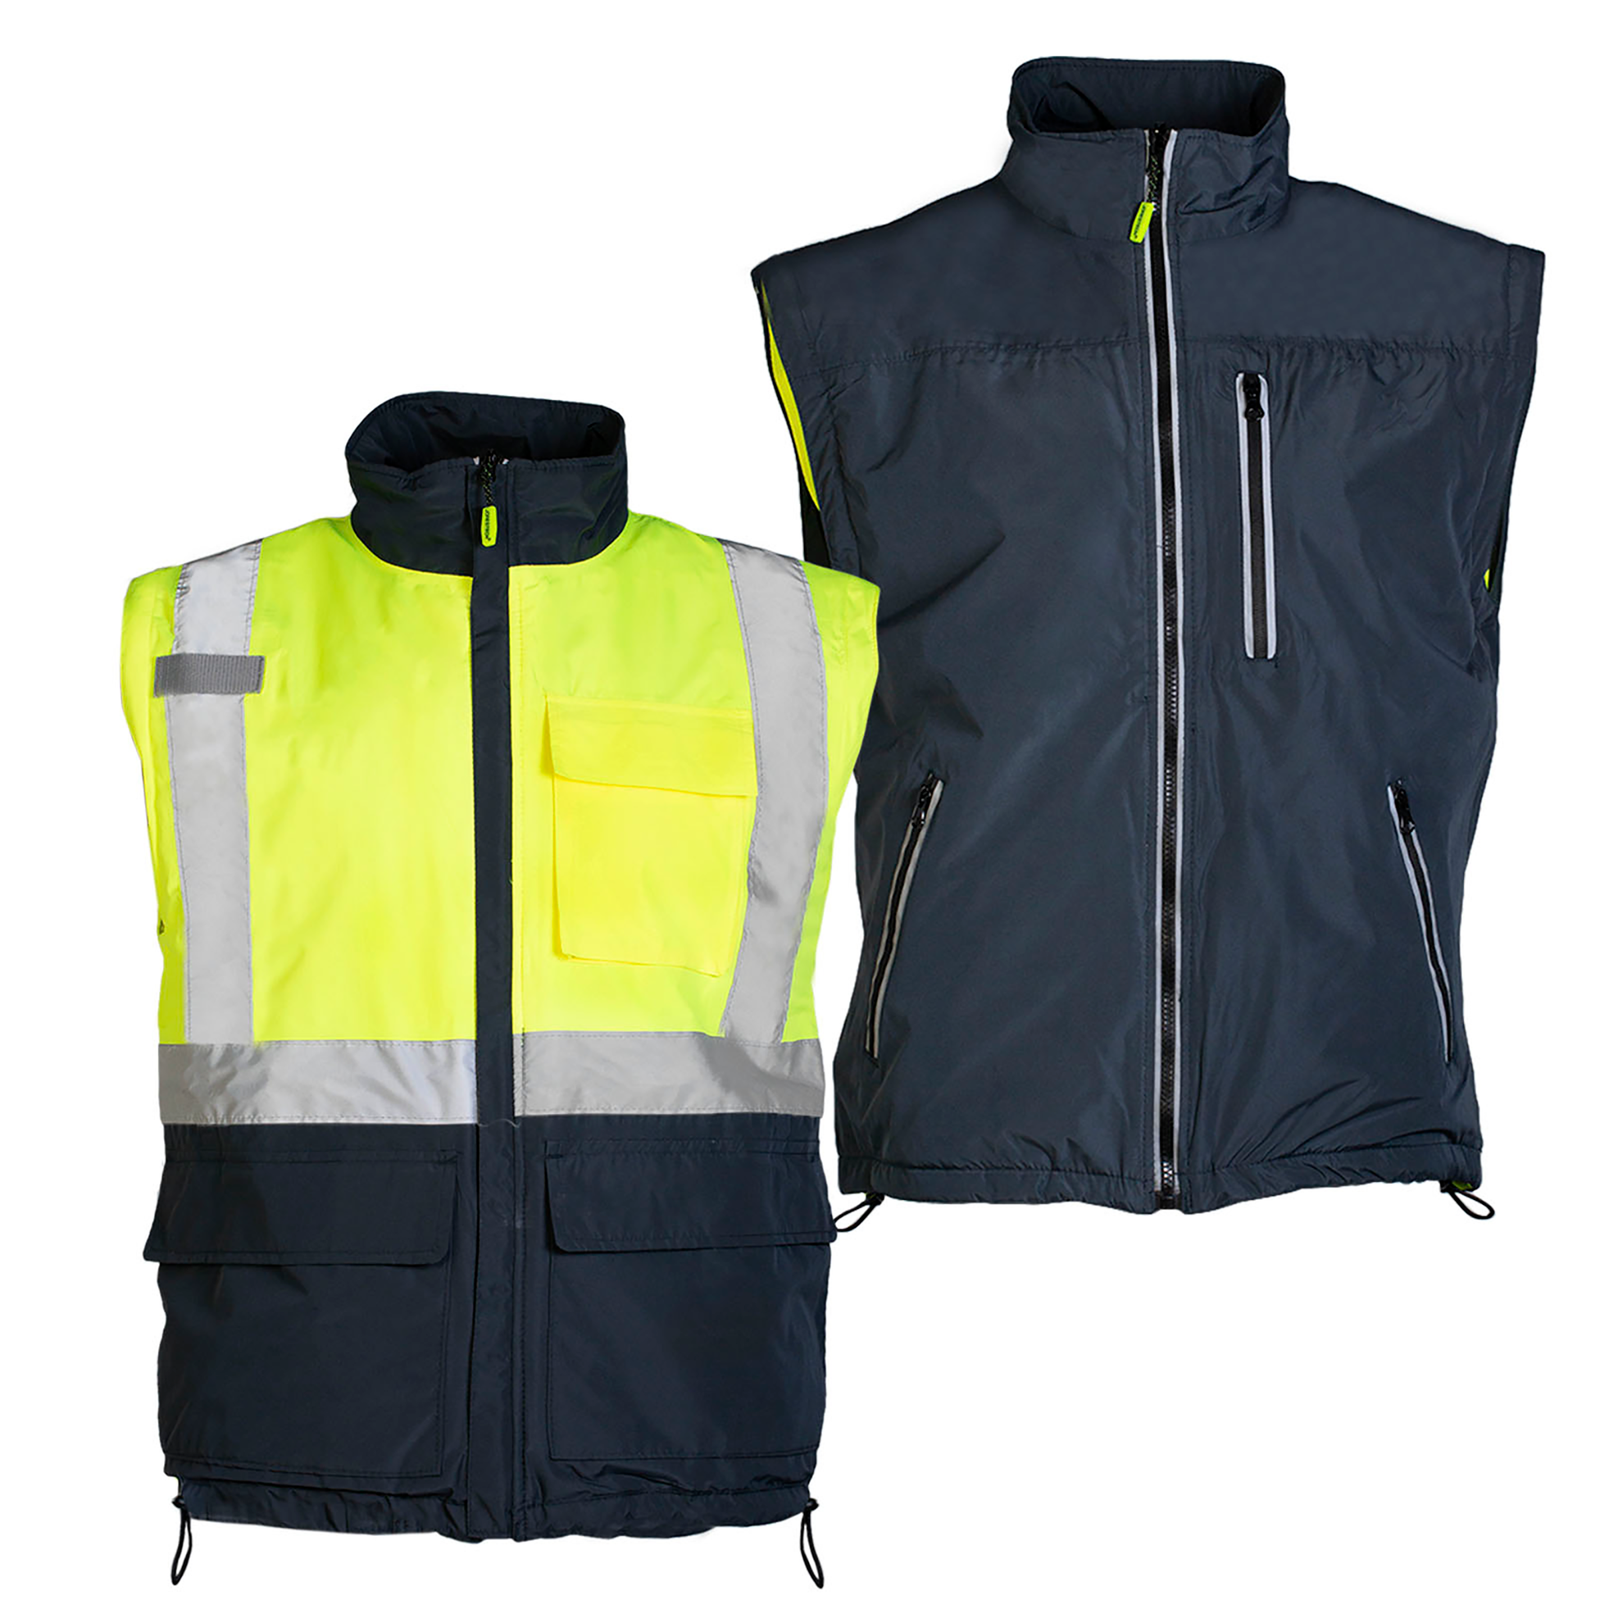 Shows 2 vest one reflective and one non reflective. This is how the safety jackets looks once the sleeves are removes